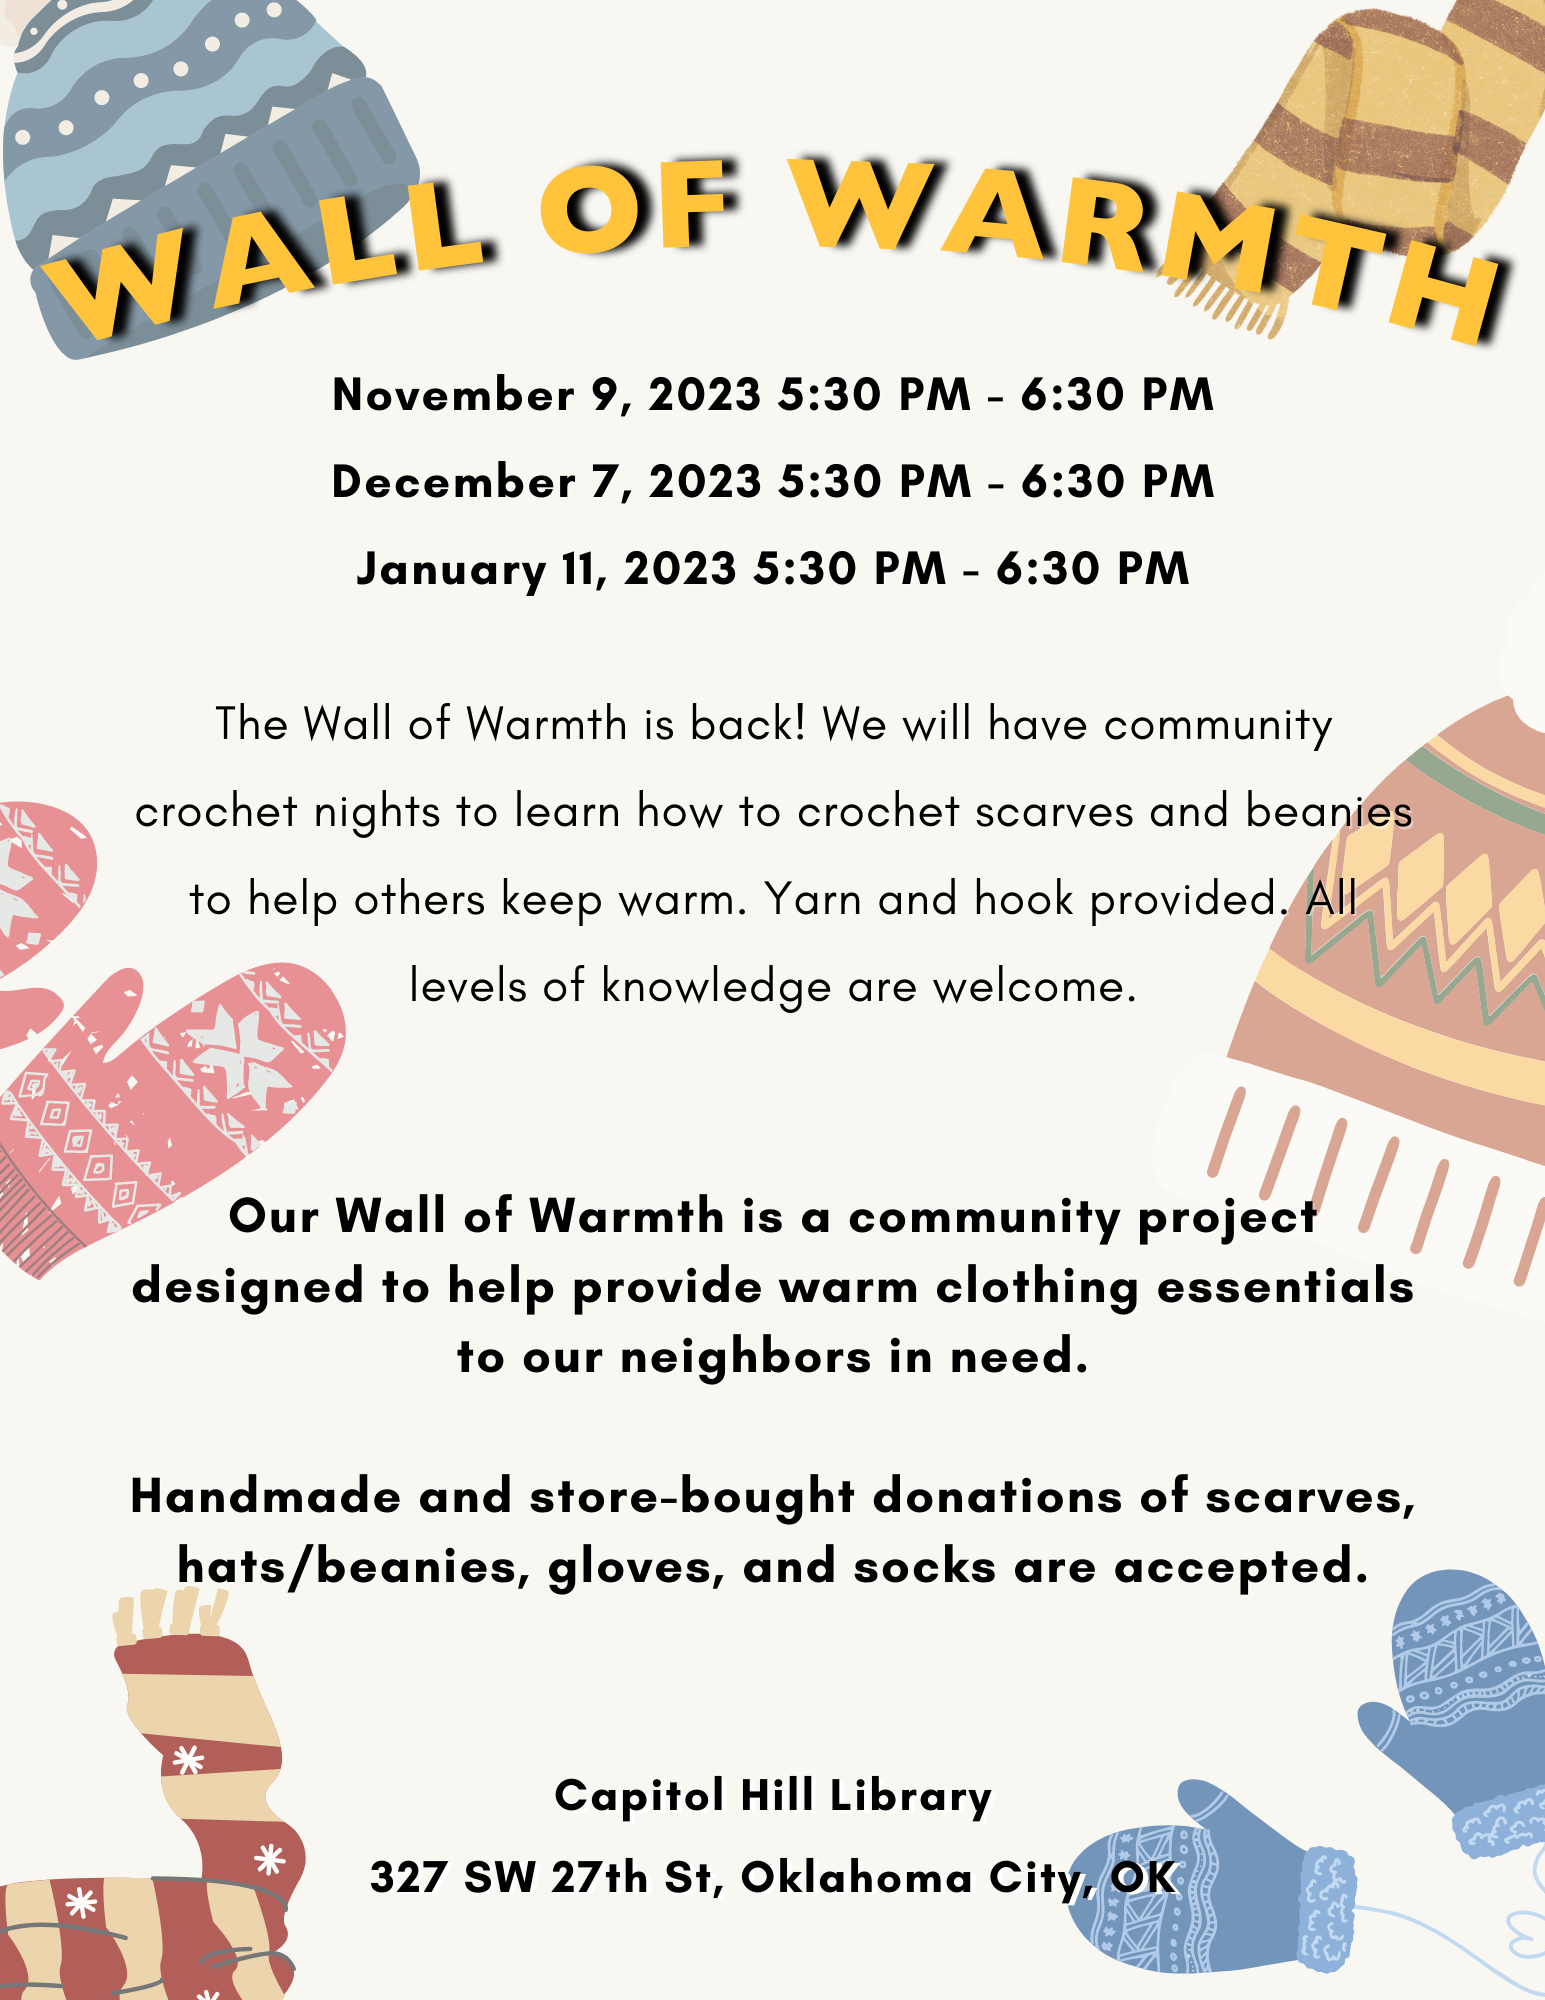 Wall of warmth description with community crochet night events listed.